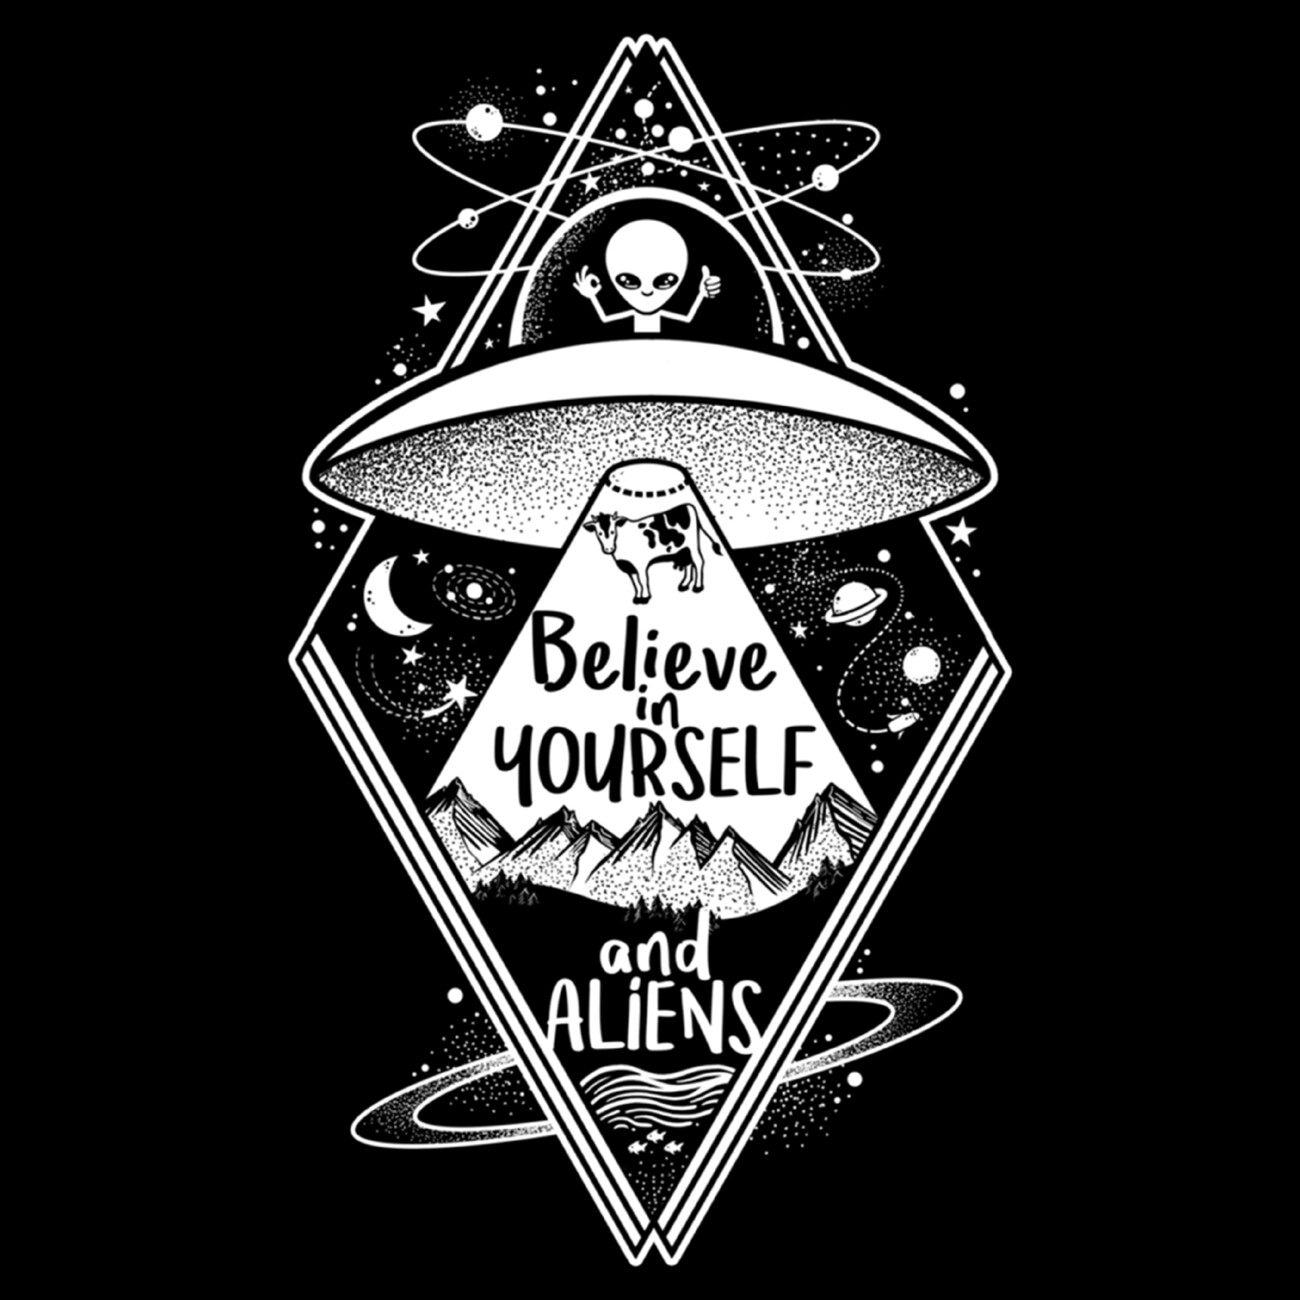 Believe in yourself and aliens Wall Mural | Buy online at Europosters